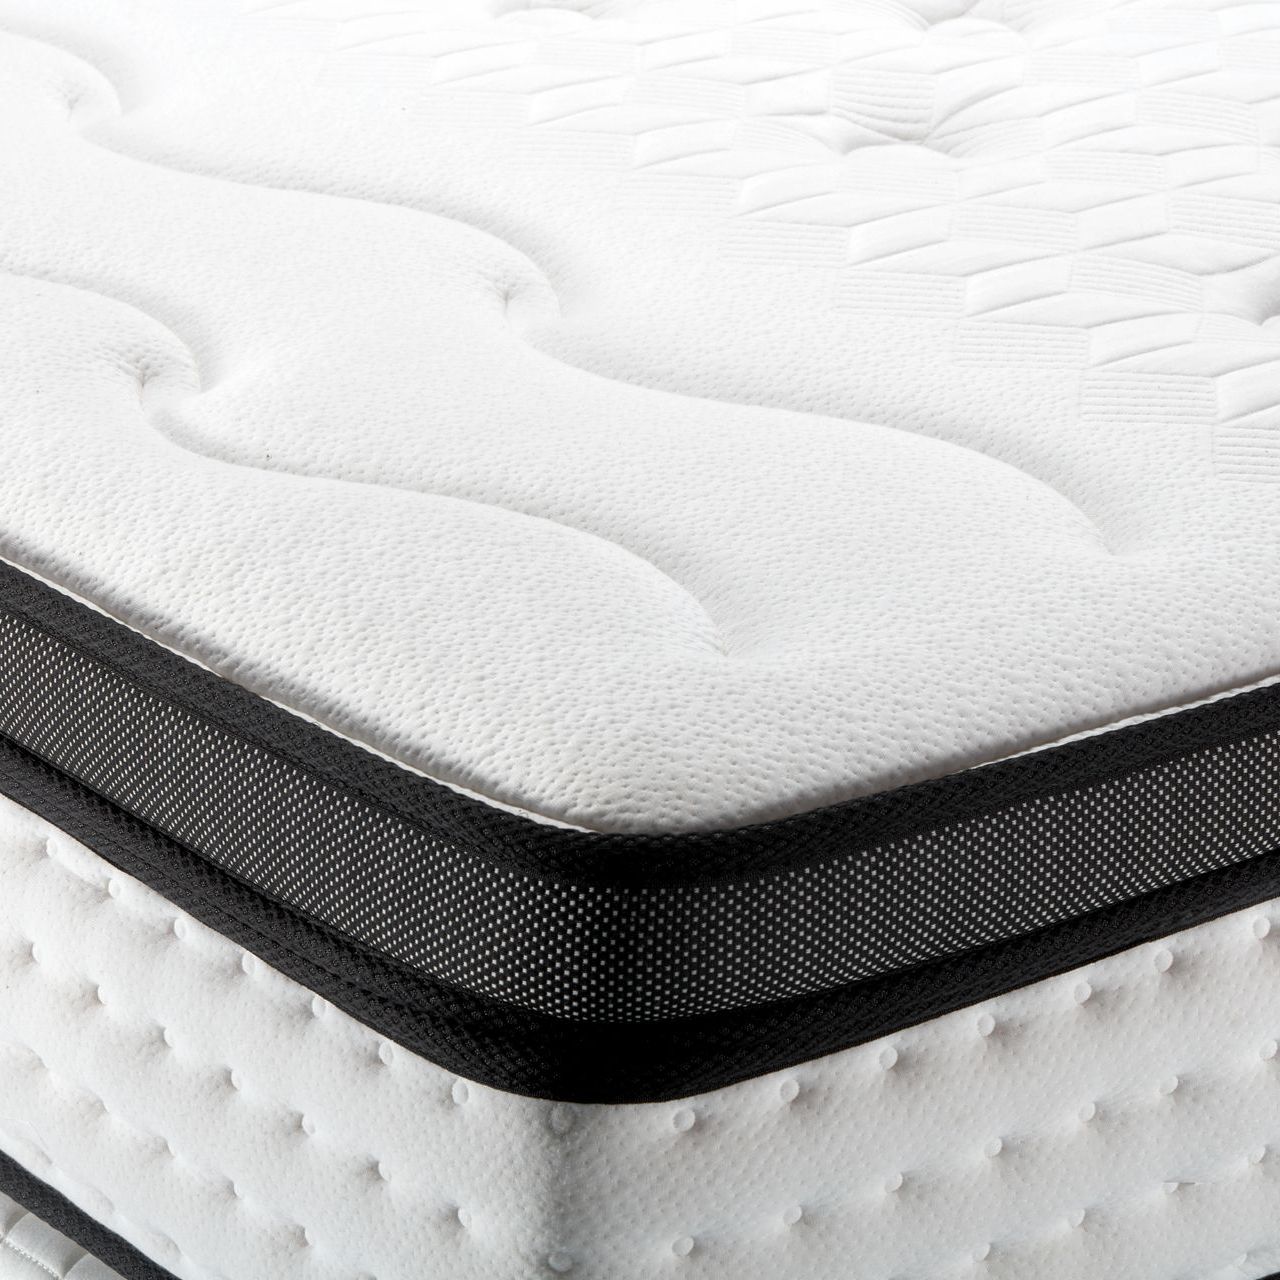 InnerSpring Mattresses for sale: Twilight Signature Collection at Spokane, WA mattress store